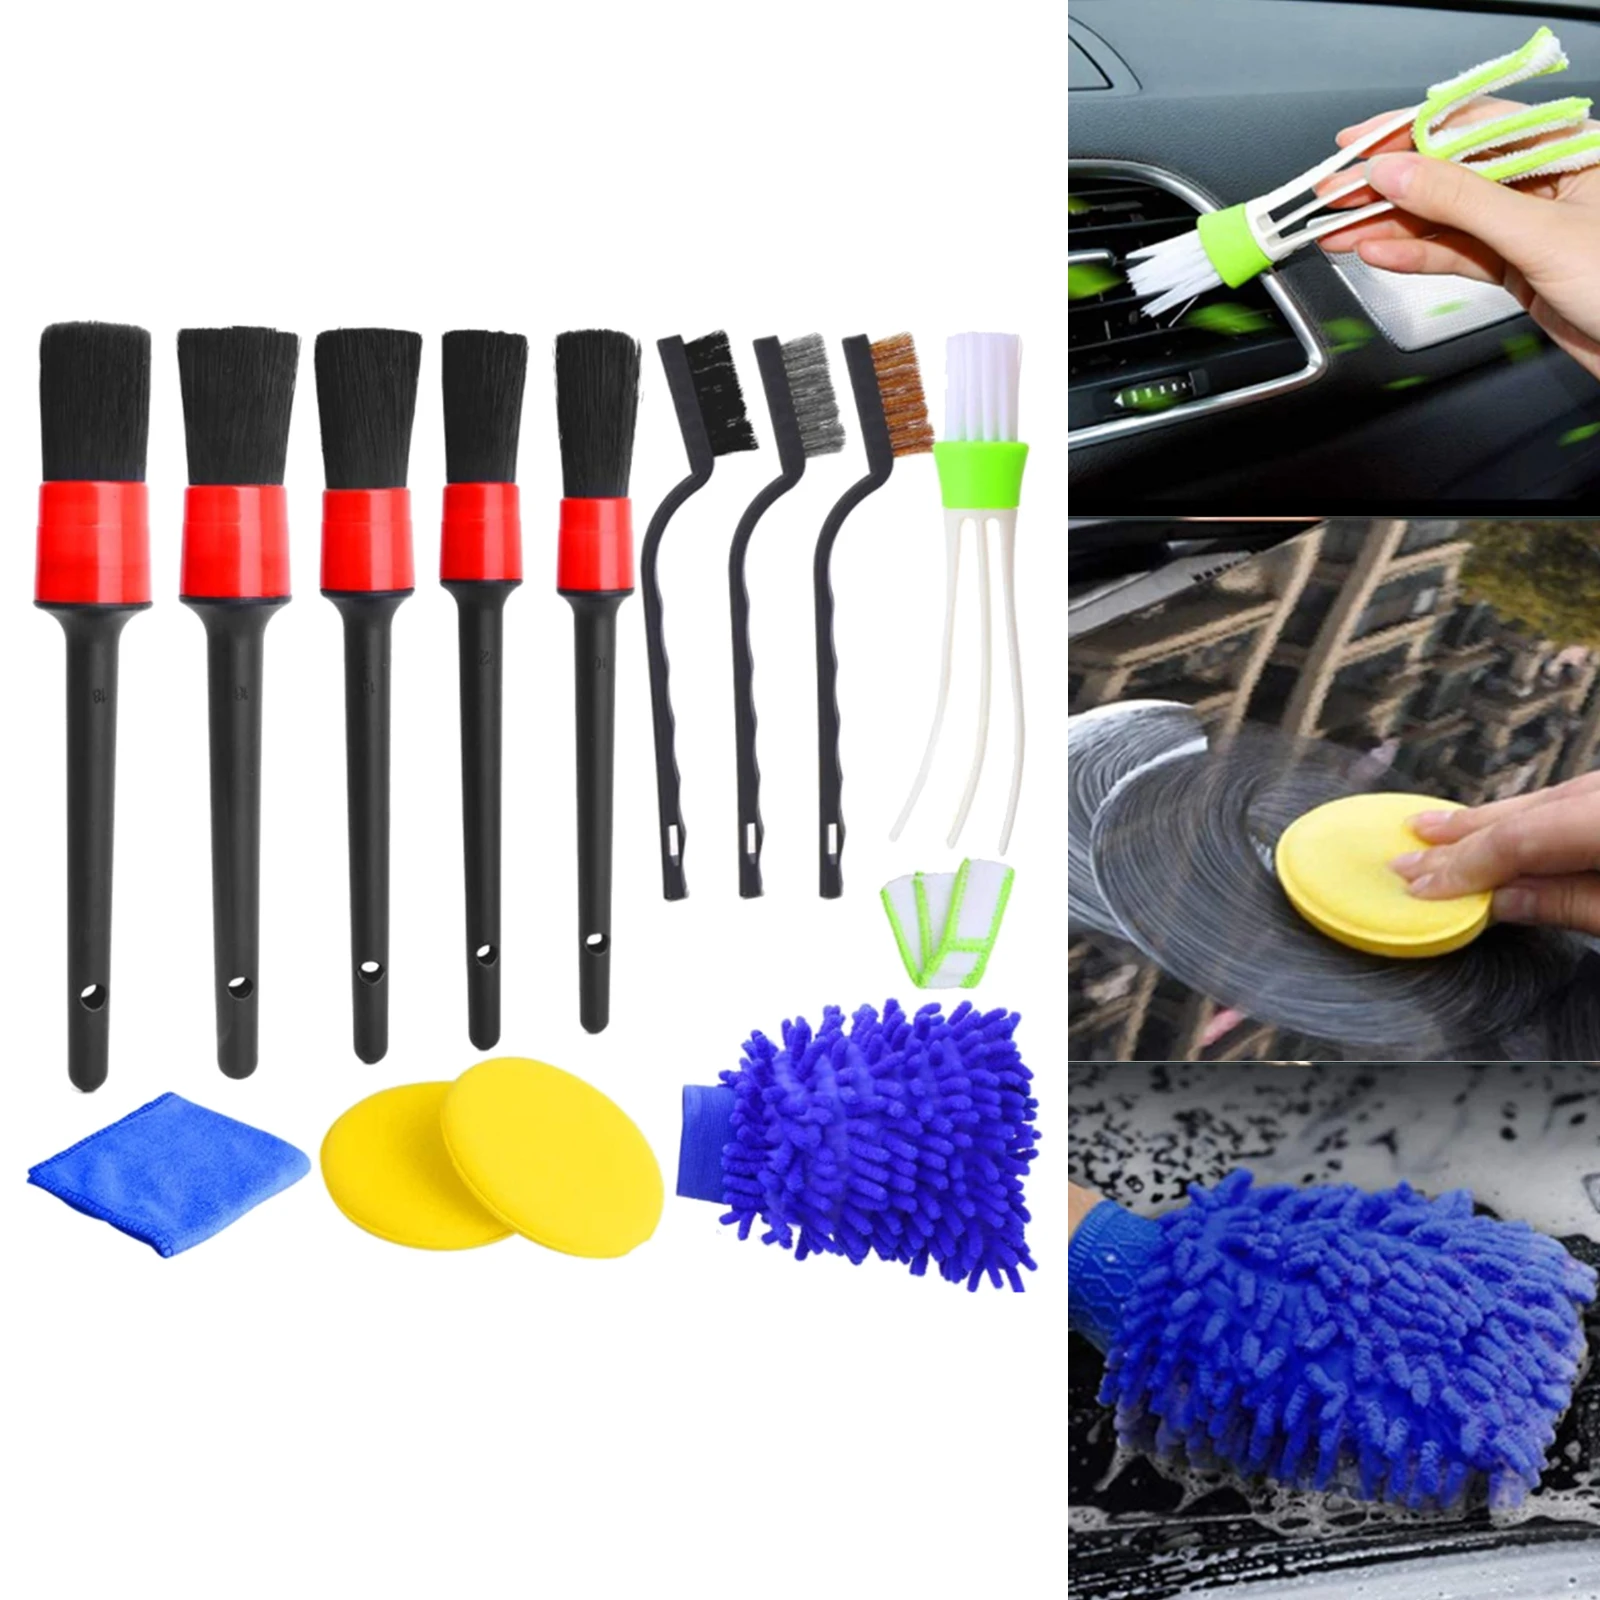 13x Car Detailing Brush Set Dashboard Air Outlet Clean Brush Tools Dashboard Interior Exterior Leather Air Vents Cleaning